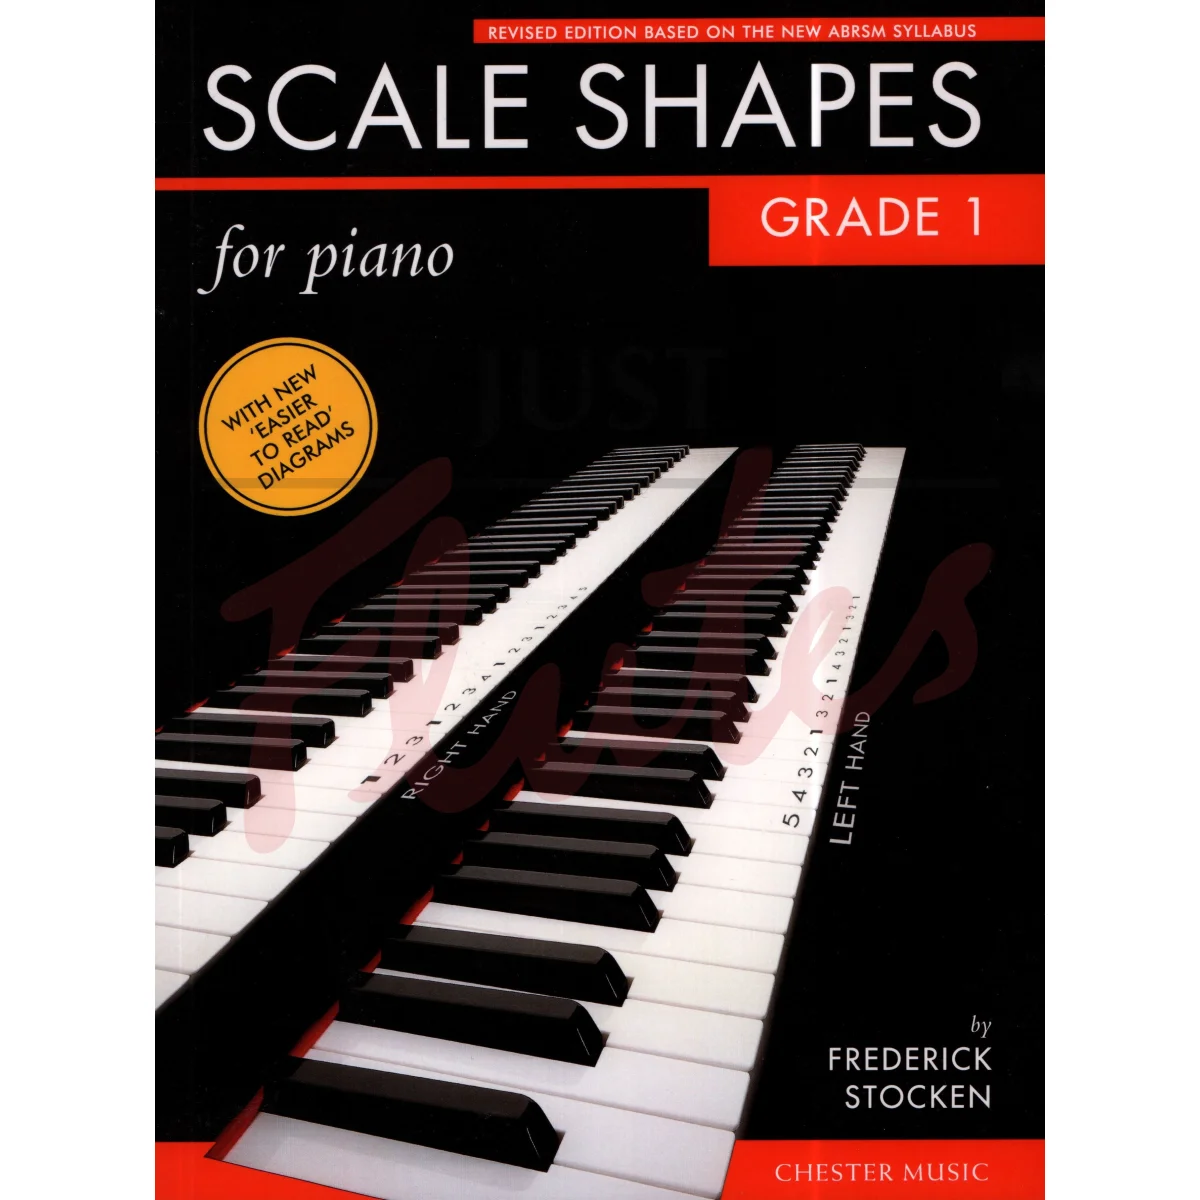 Scale Shapes for Piano Grade 1 (2nd Edition)